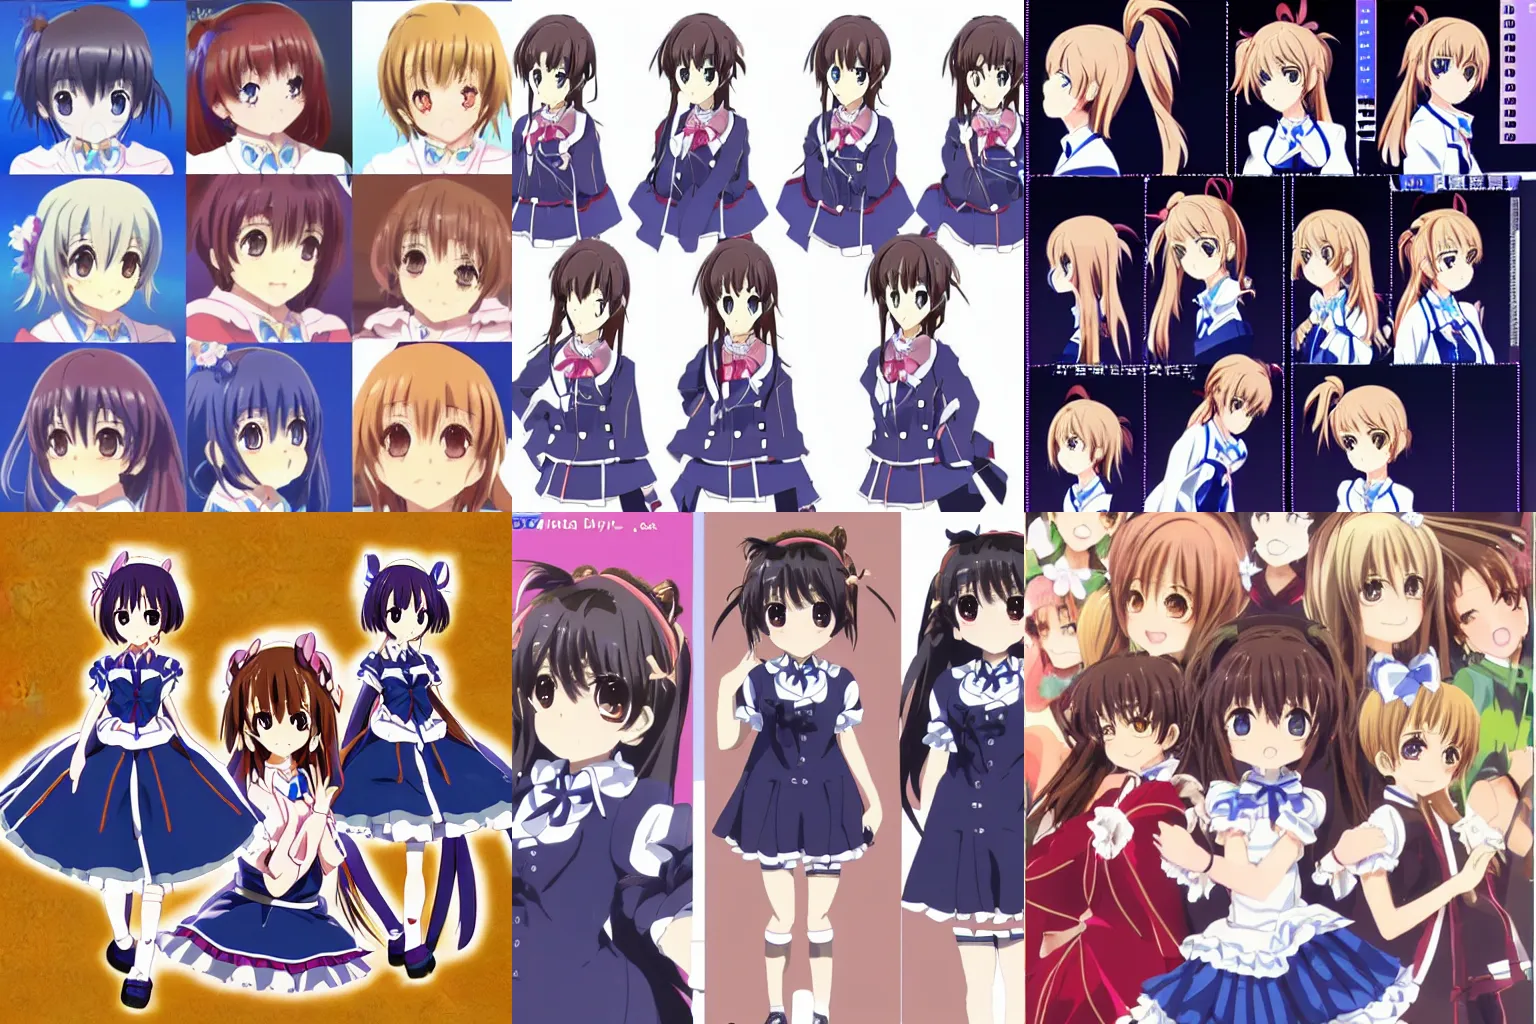 Prompt: kyoani anime girl character design